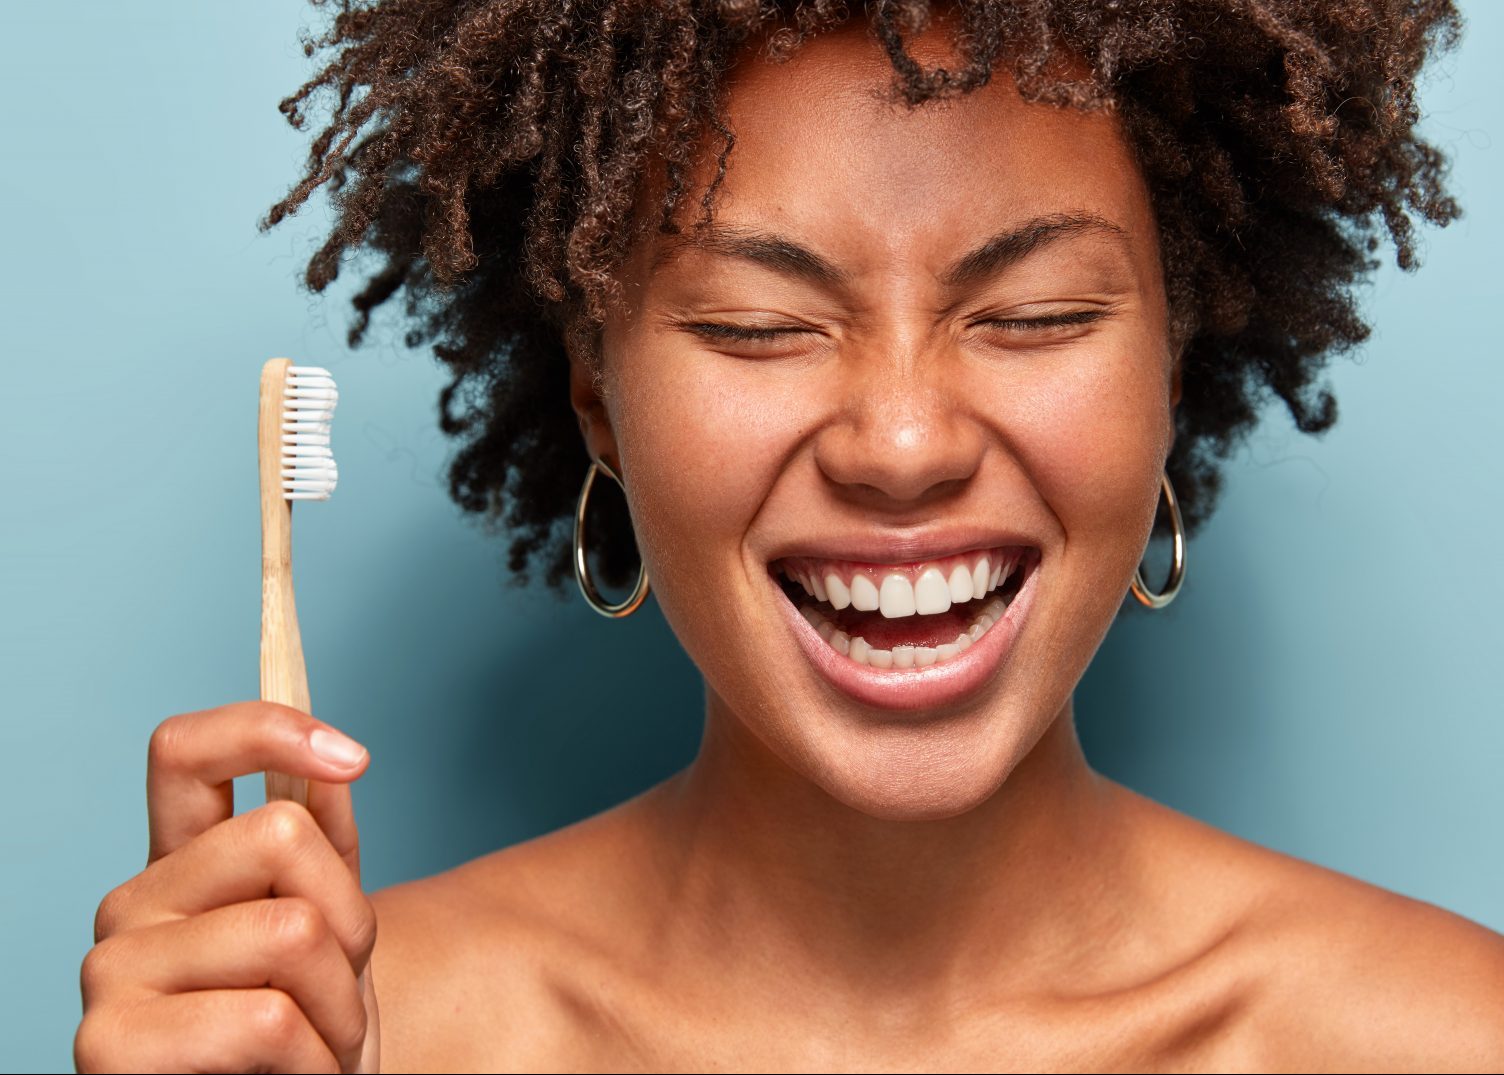 oral microbiome smiling with curly hair, laughs while has morning routines, shows bright smile, holds toothbrush, stands with bare shoulders over blue background